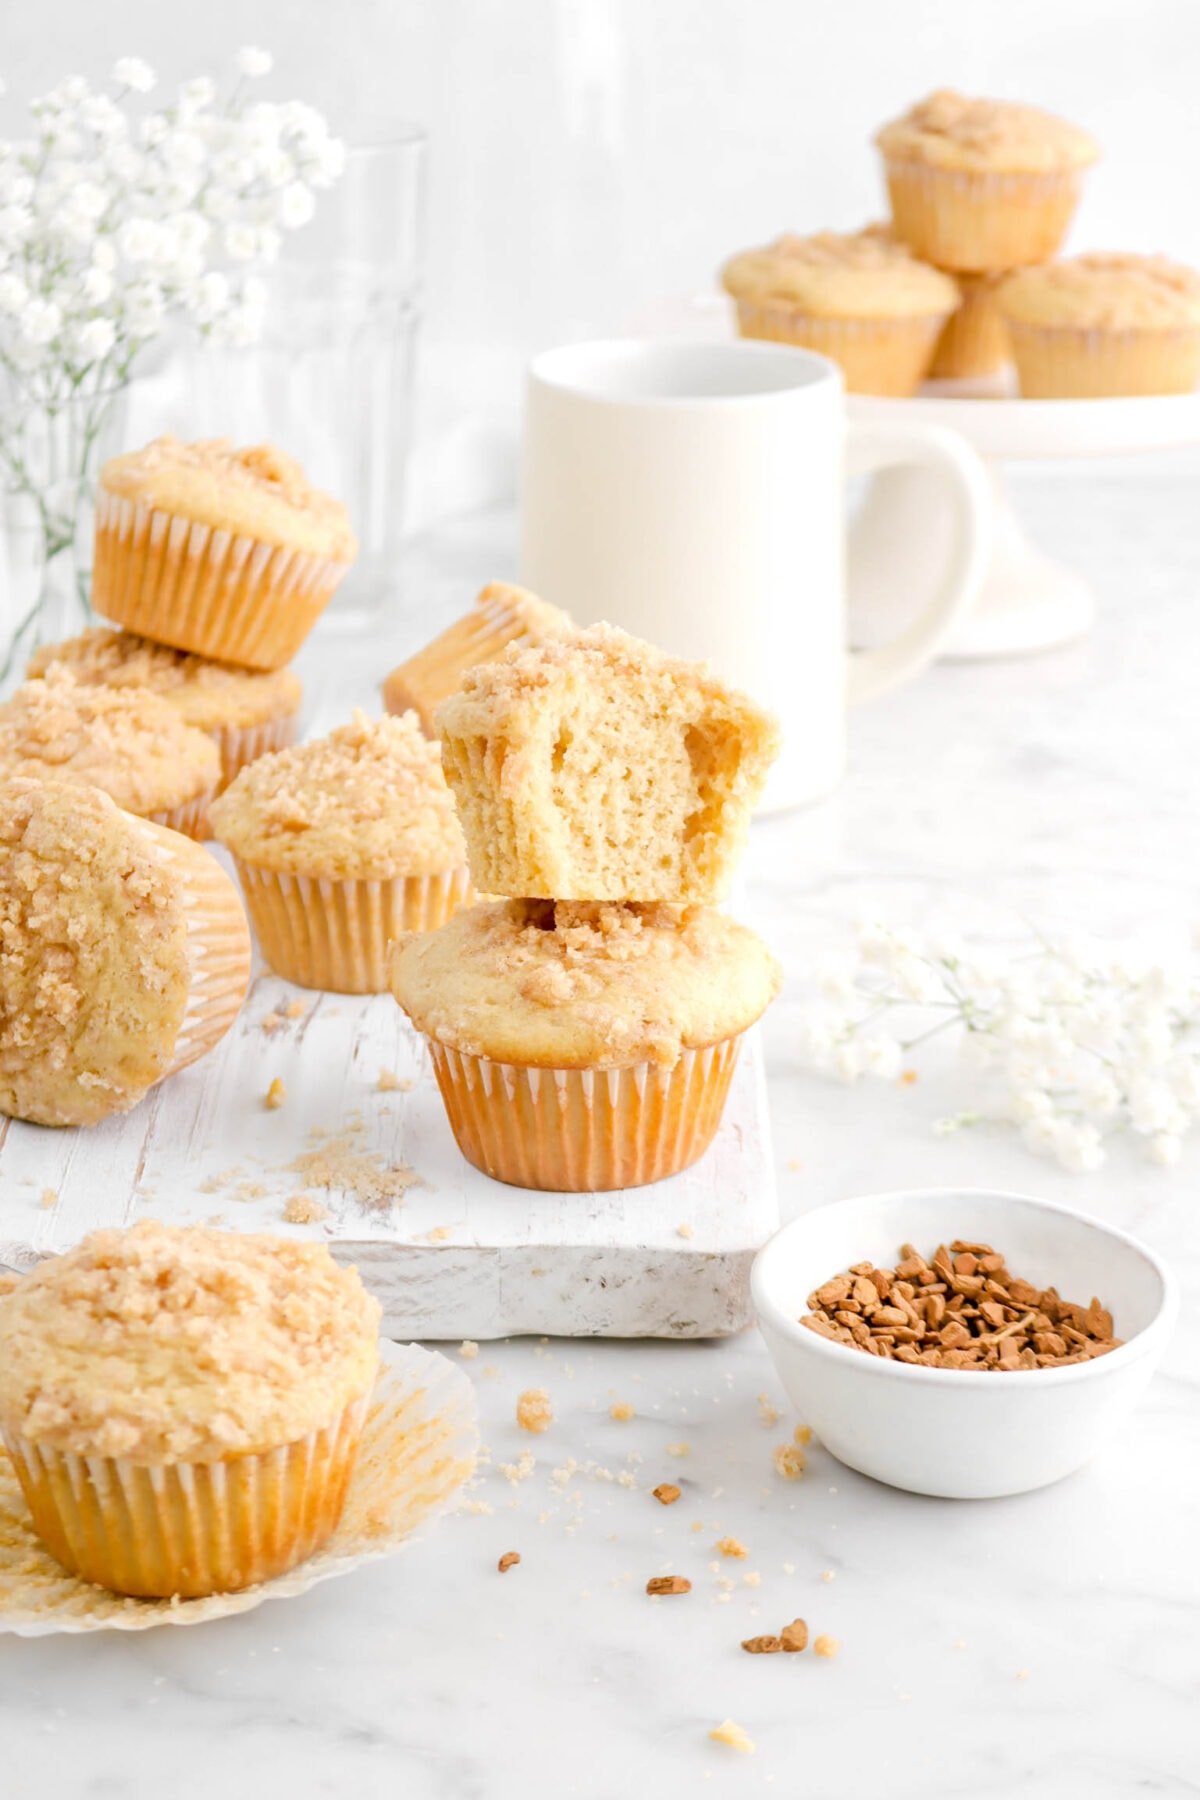 chai tea muffins on white wood board with two in the front stacked, a bit missing from one, with bowl of cinnamon chips, a coffee mug, a cake plate, and flowers behind